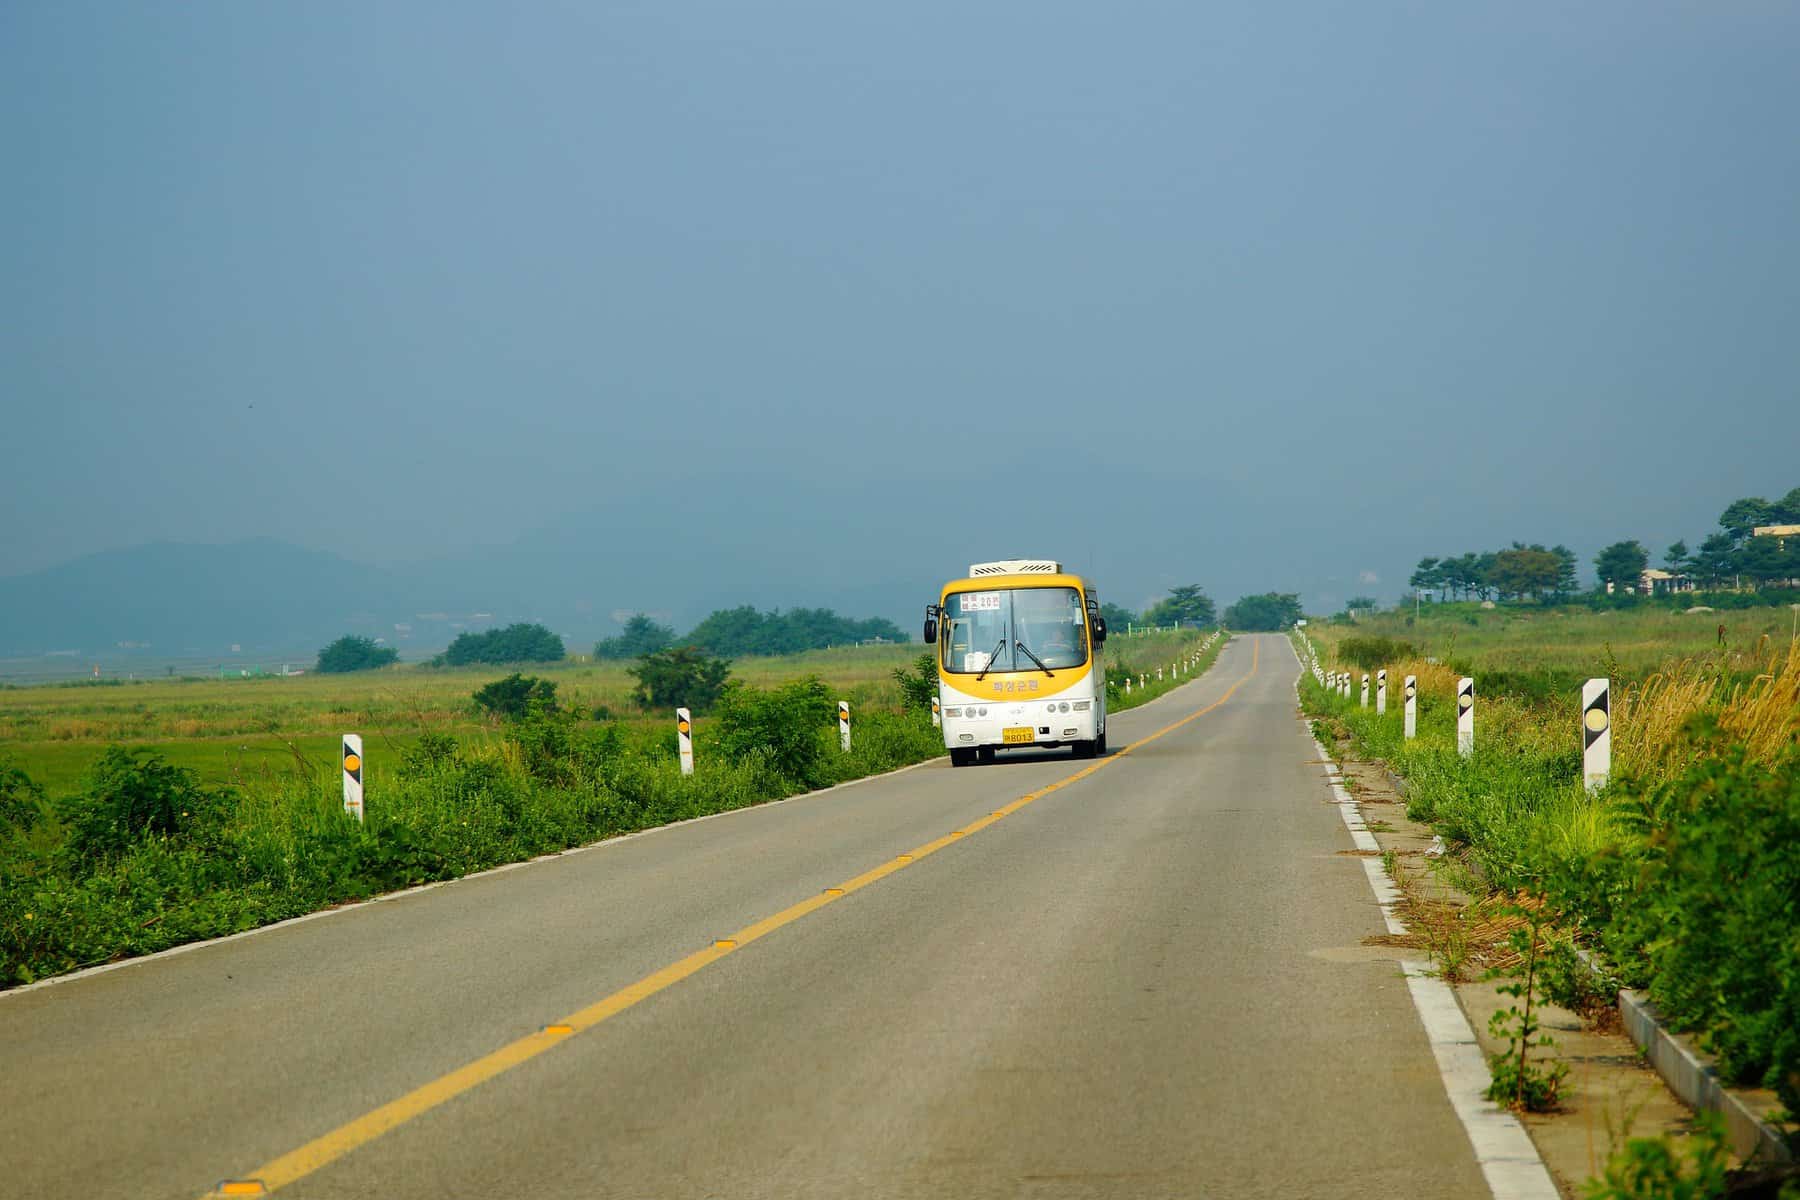 A bus is seen coming down a road toward the camera from a distance.